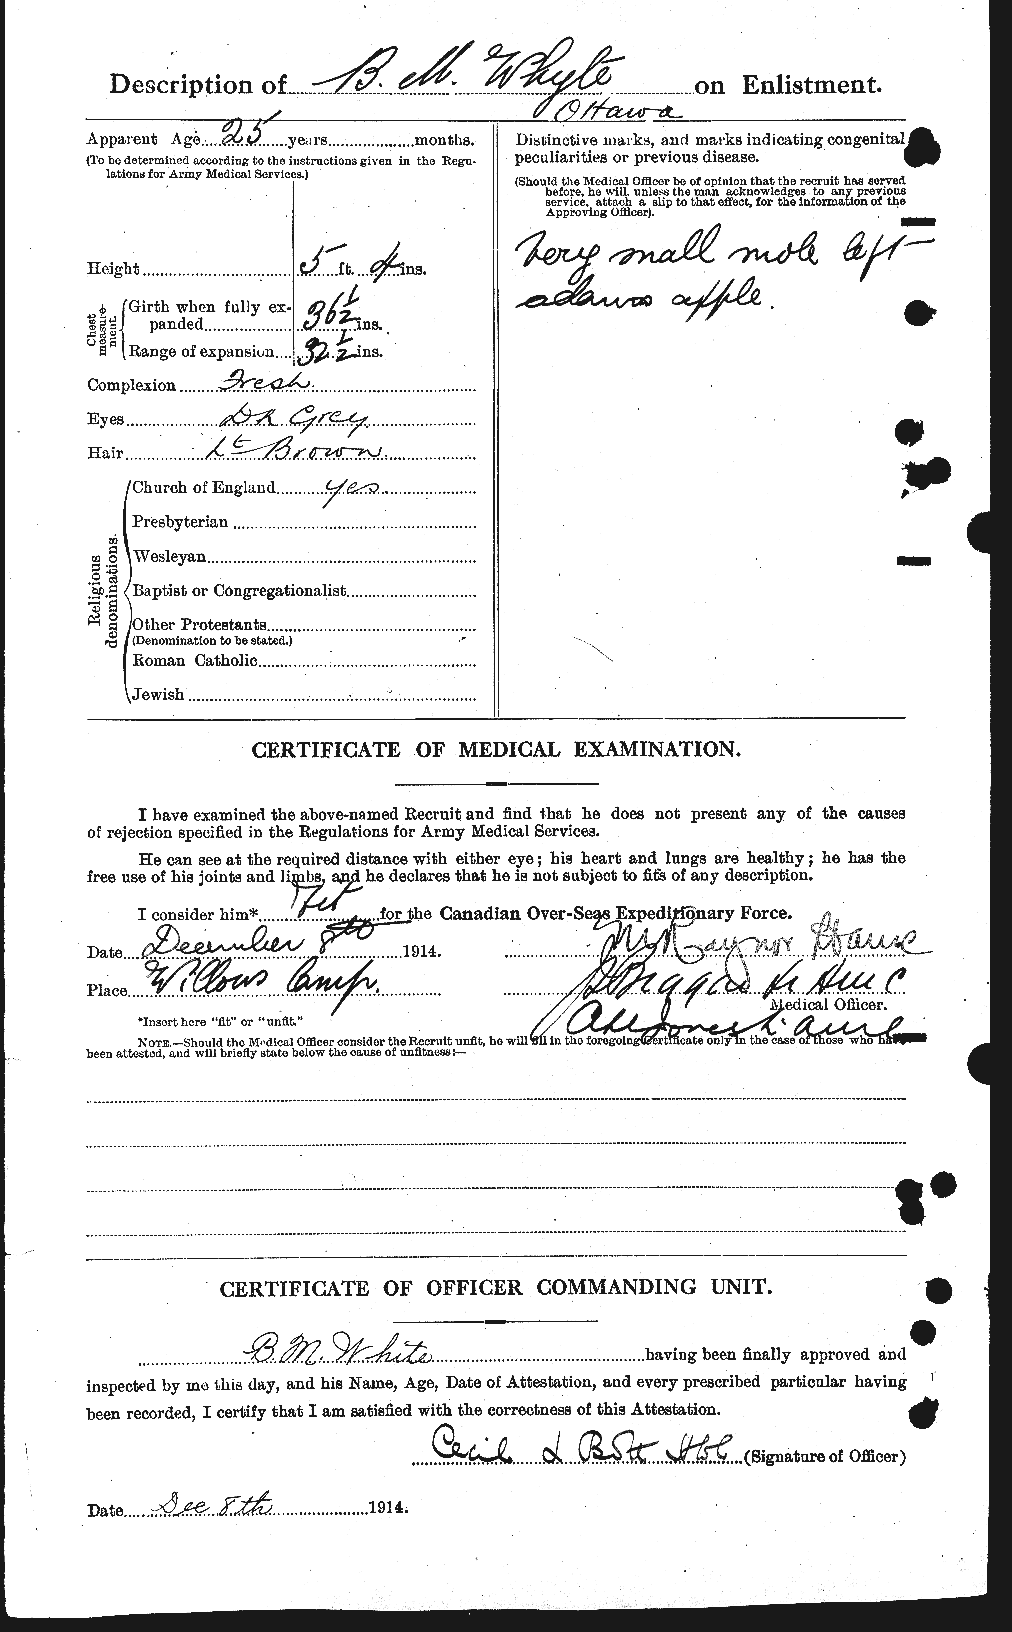 Personnel Records of the First World War - CEF 672491b